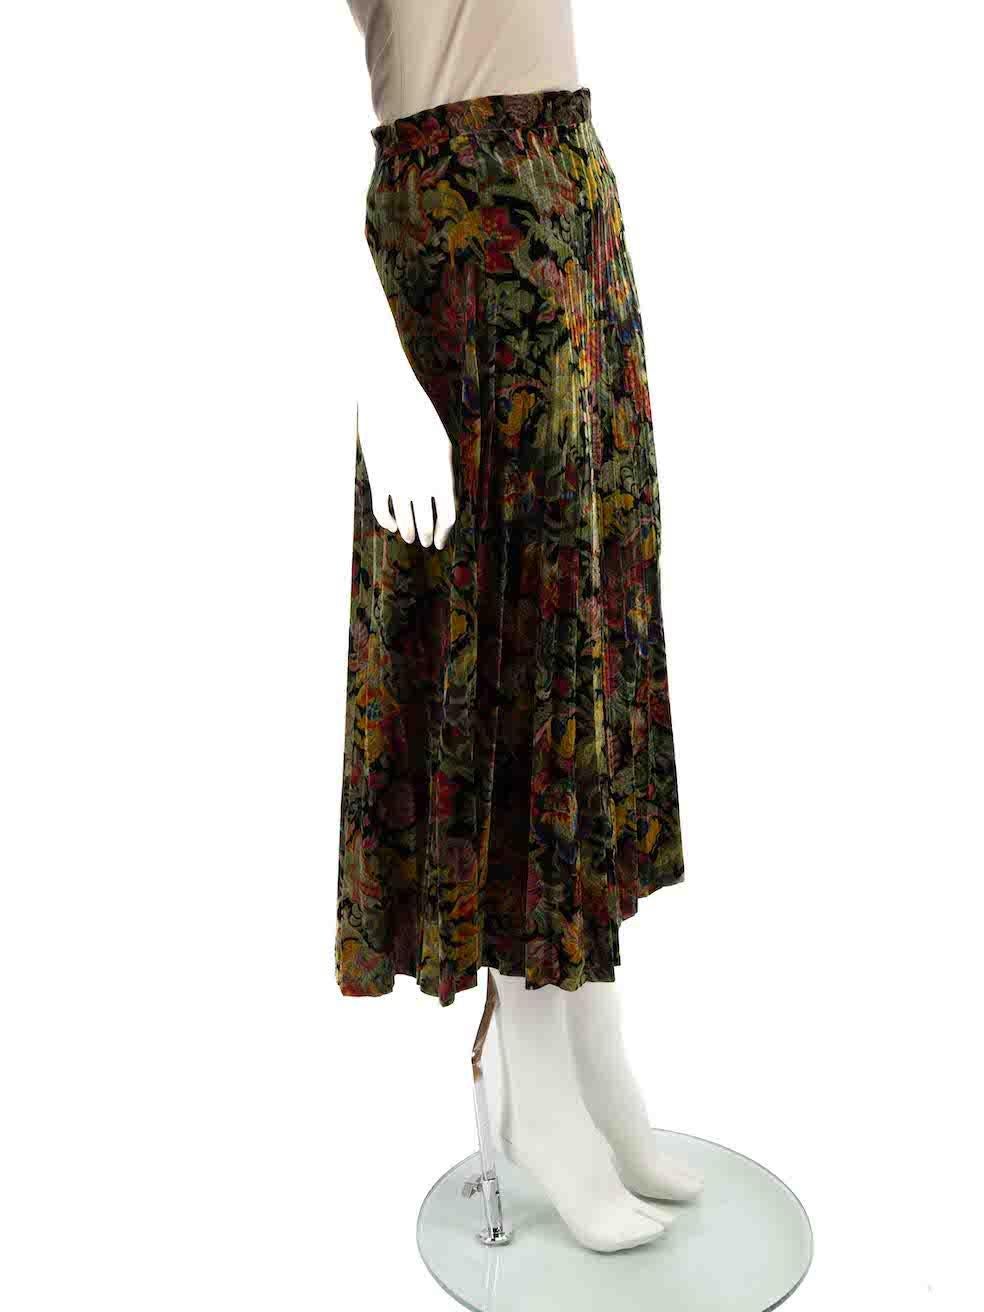 CONDITION is Very good. Minimal wear to skirt is evident. Light marks to inside labels on this used Sandro designer resale item.
 
 
 
 Details
 
 
 Multicolour
 
 Velvet
 
 Midi skirt
 
 Floral print pattern
 
 Pleated accent
 
 Side zip closure
 
